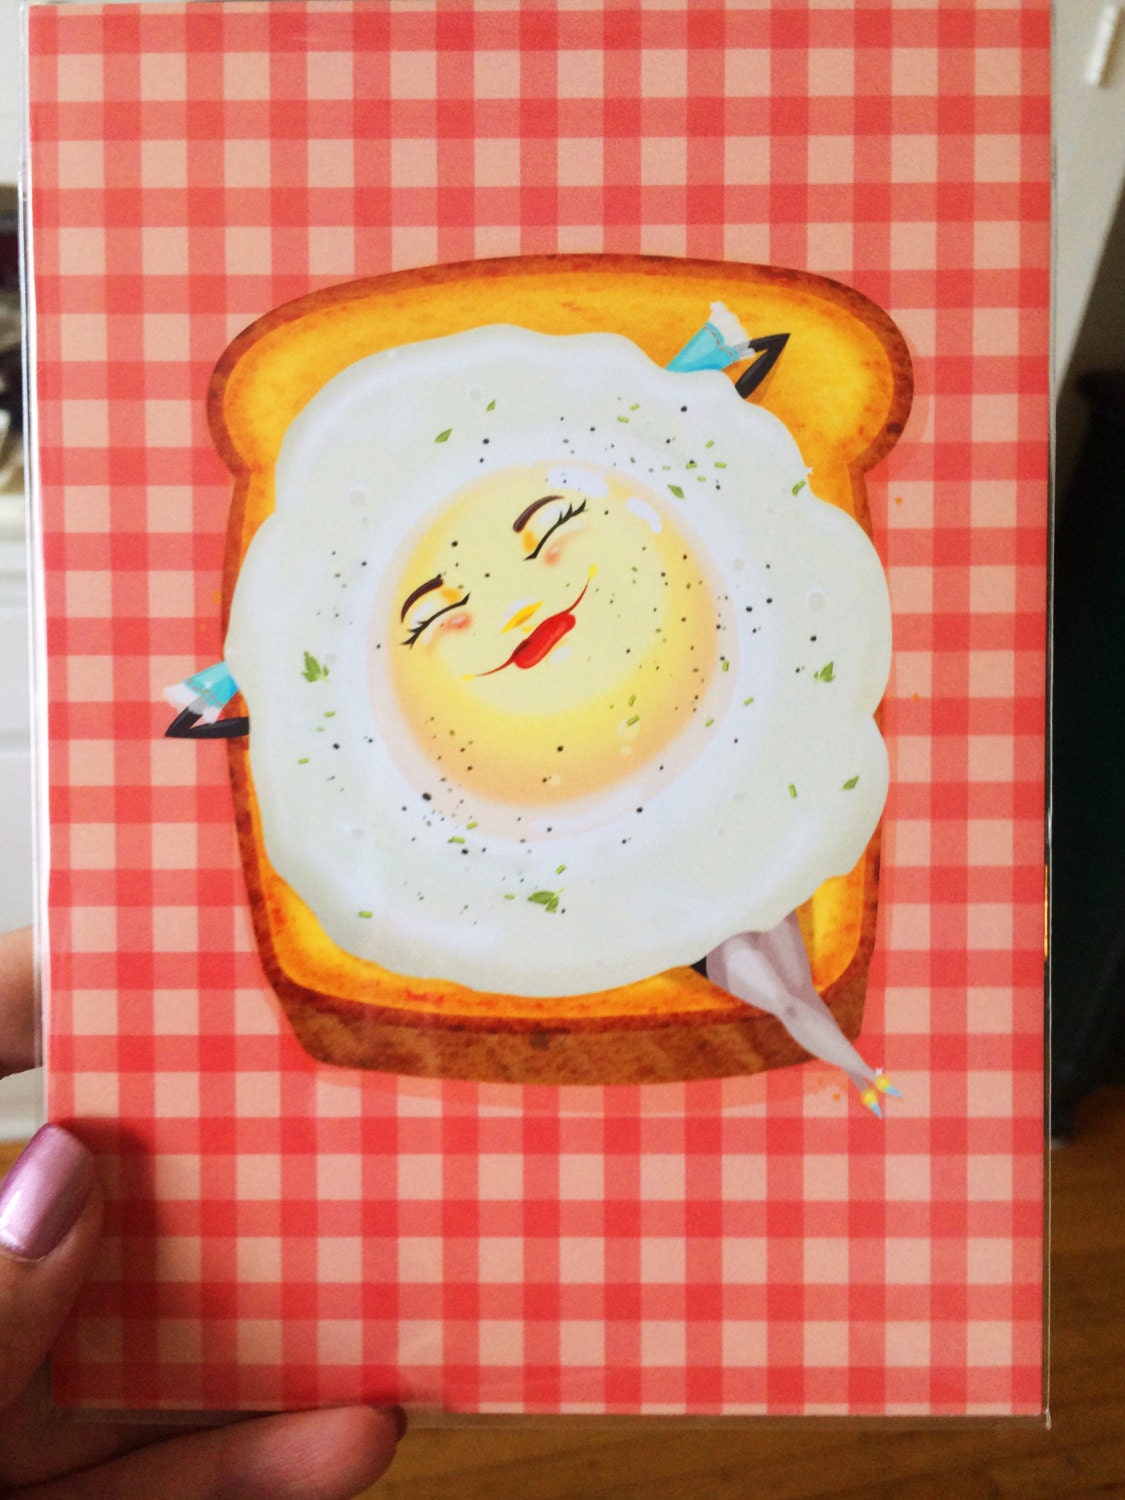 Easy Like Sunday Morning, 5x7 and 8x10 Print on Cardstock, Breakfast Illustration, Unique Home Art